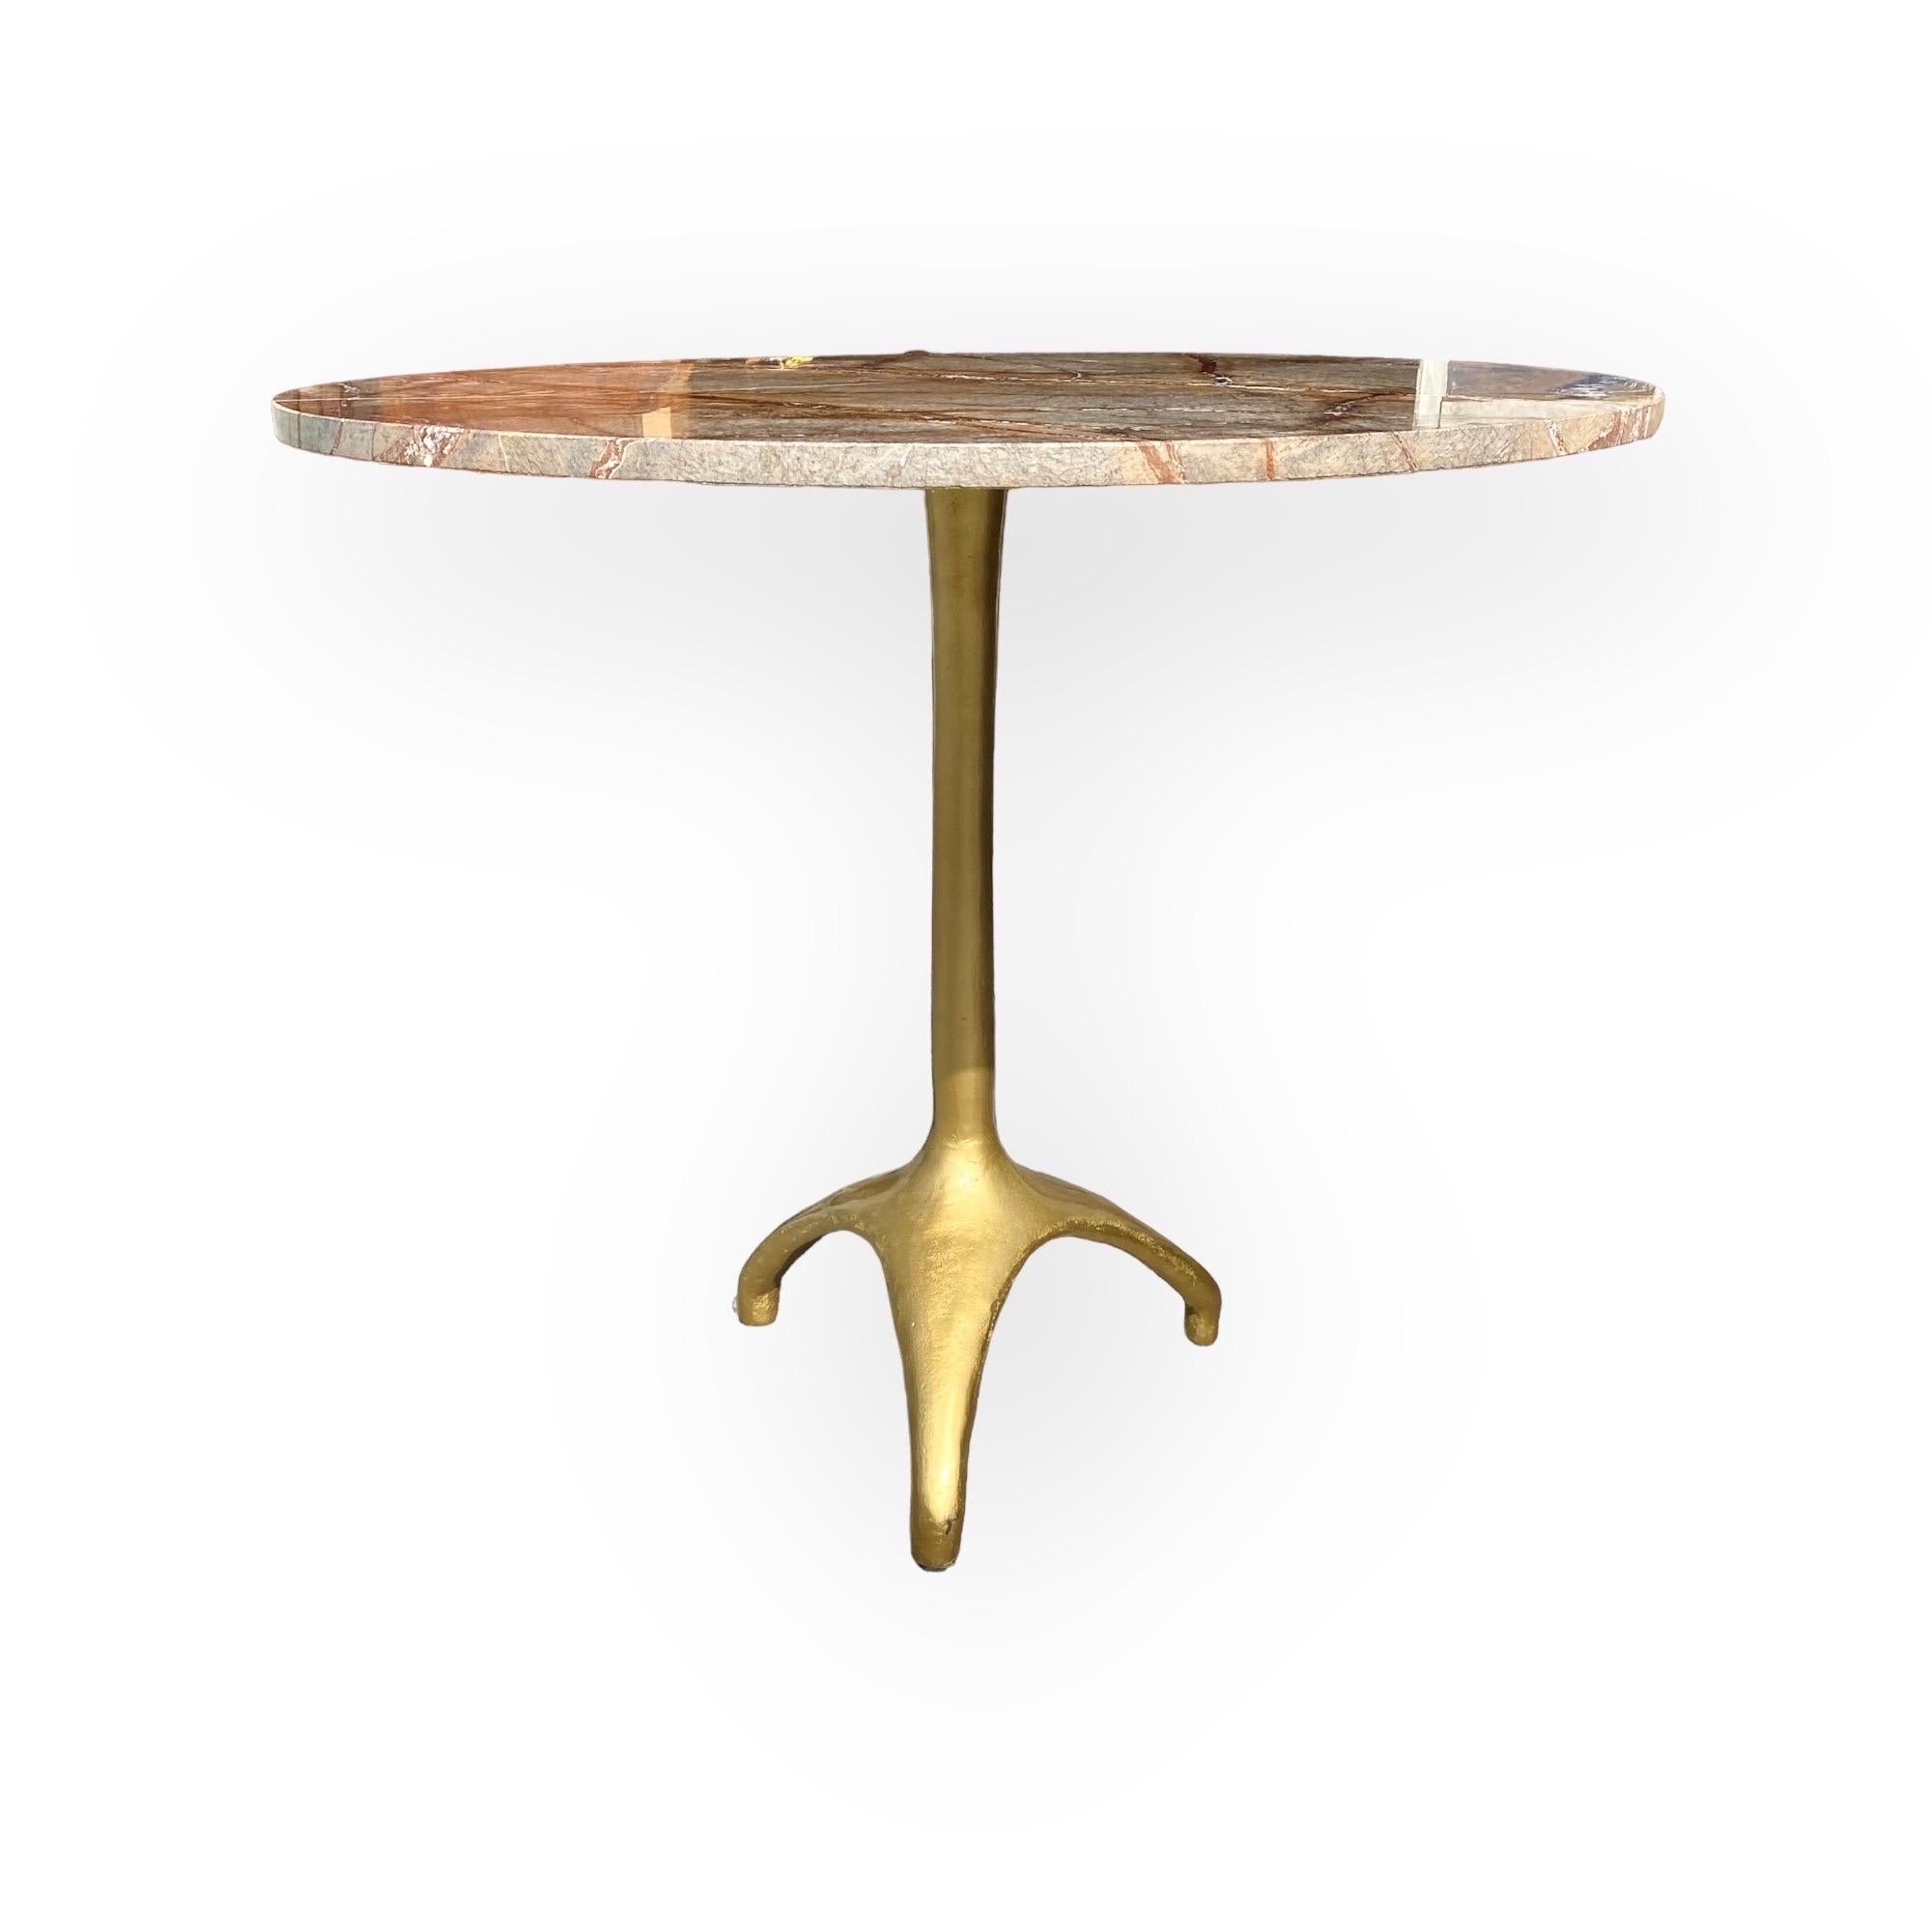 Indian A Modern, Eclectic Bidasar Marble And Brass Clad Iron Pedestal Table